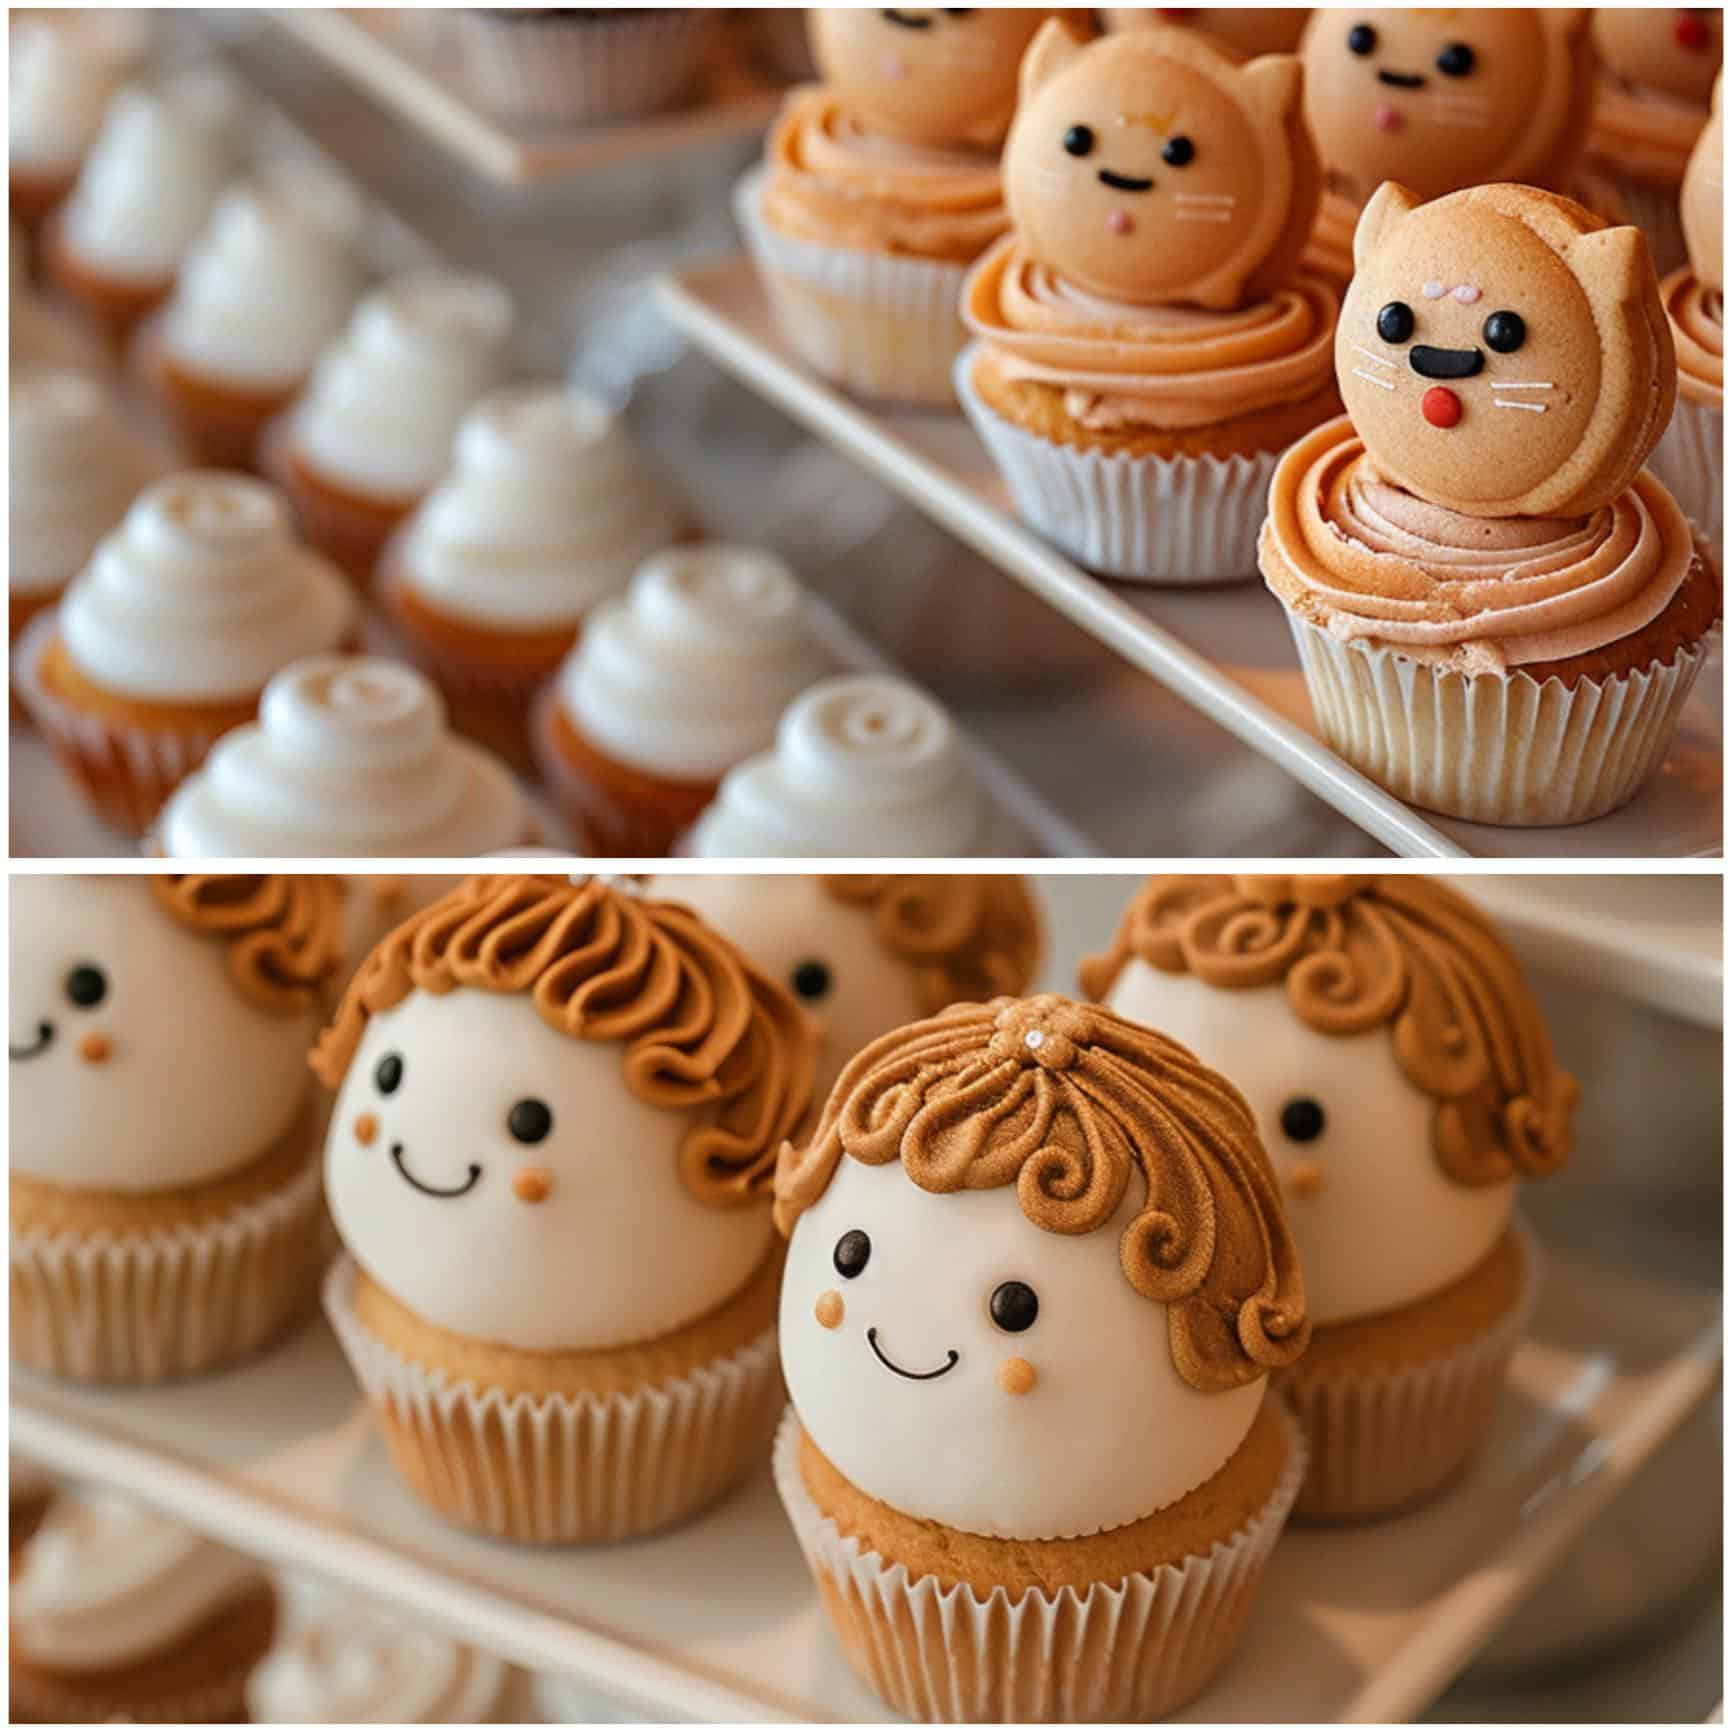 bespoke sweets for an anime-themed wedding